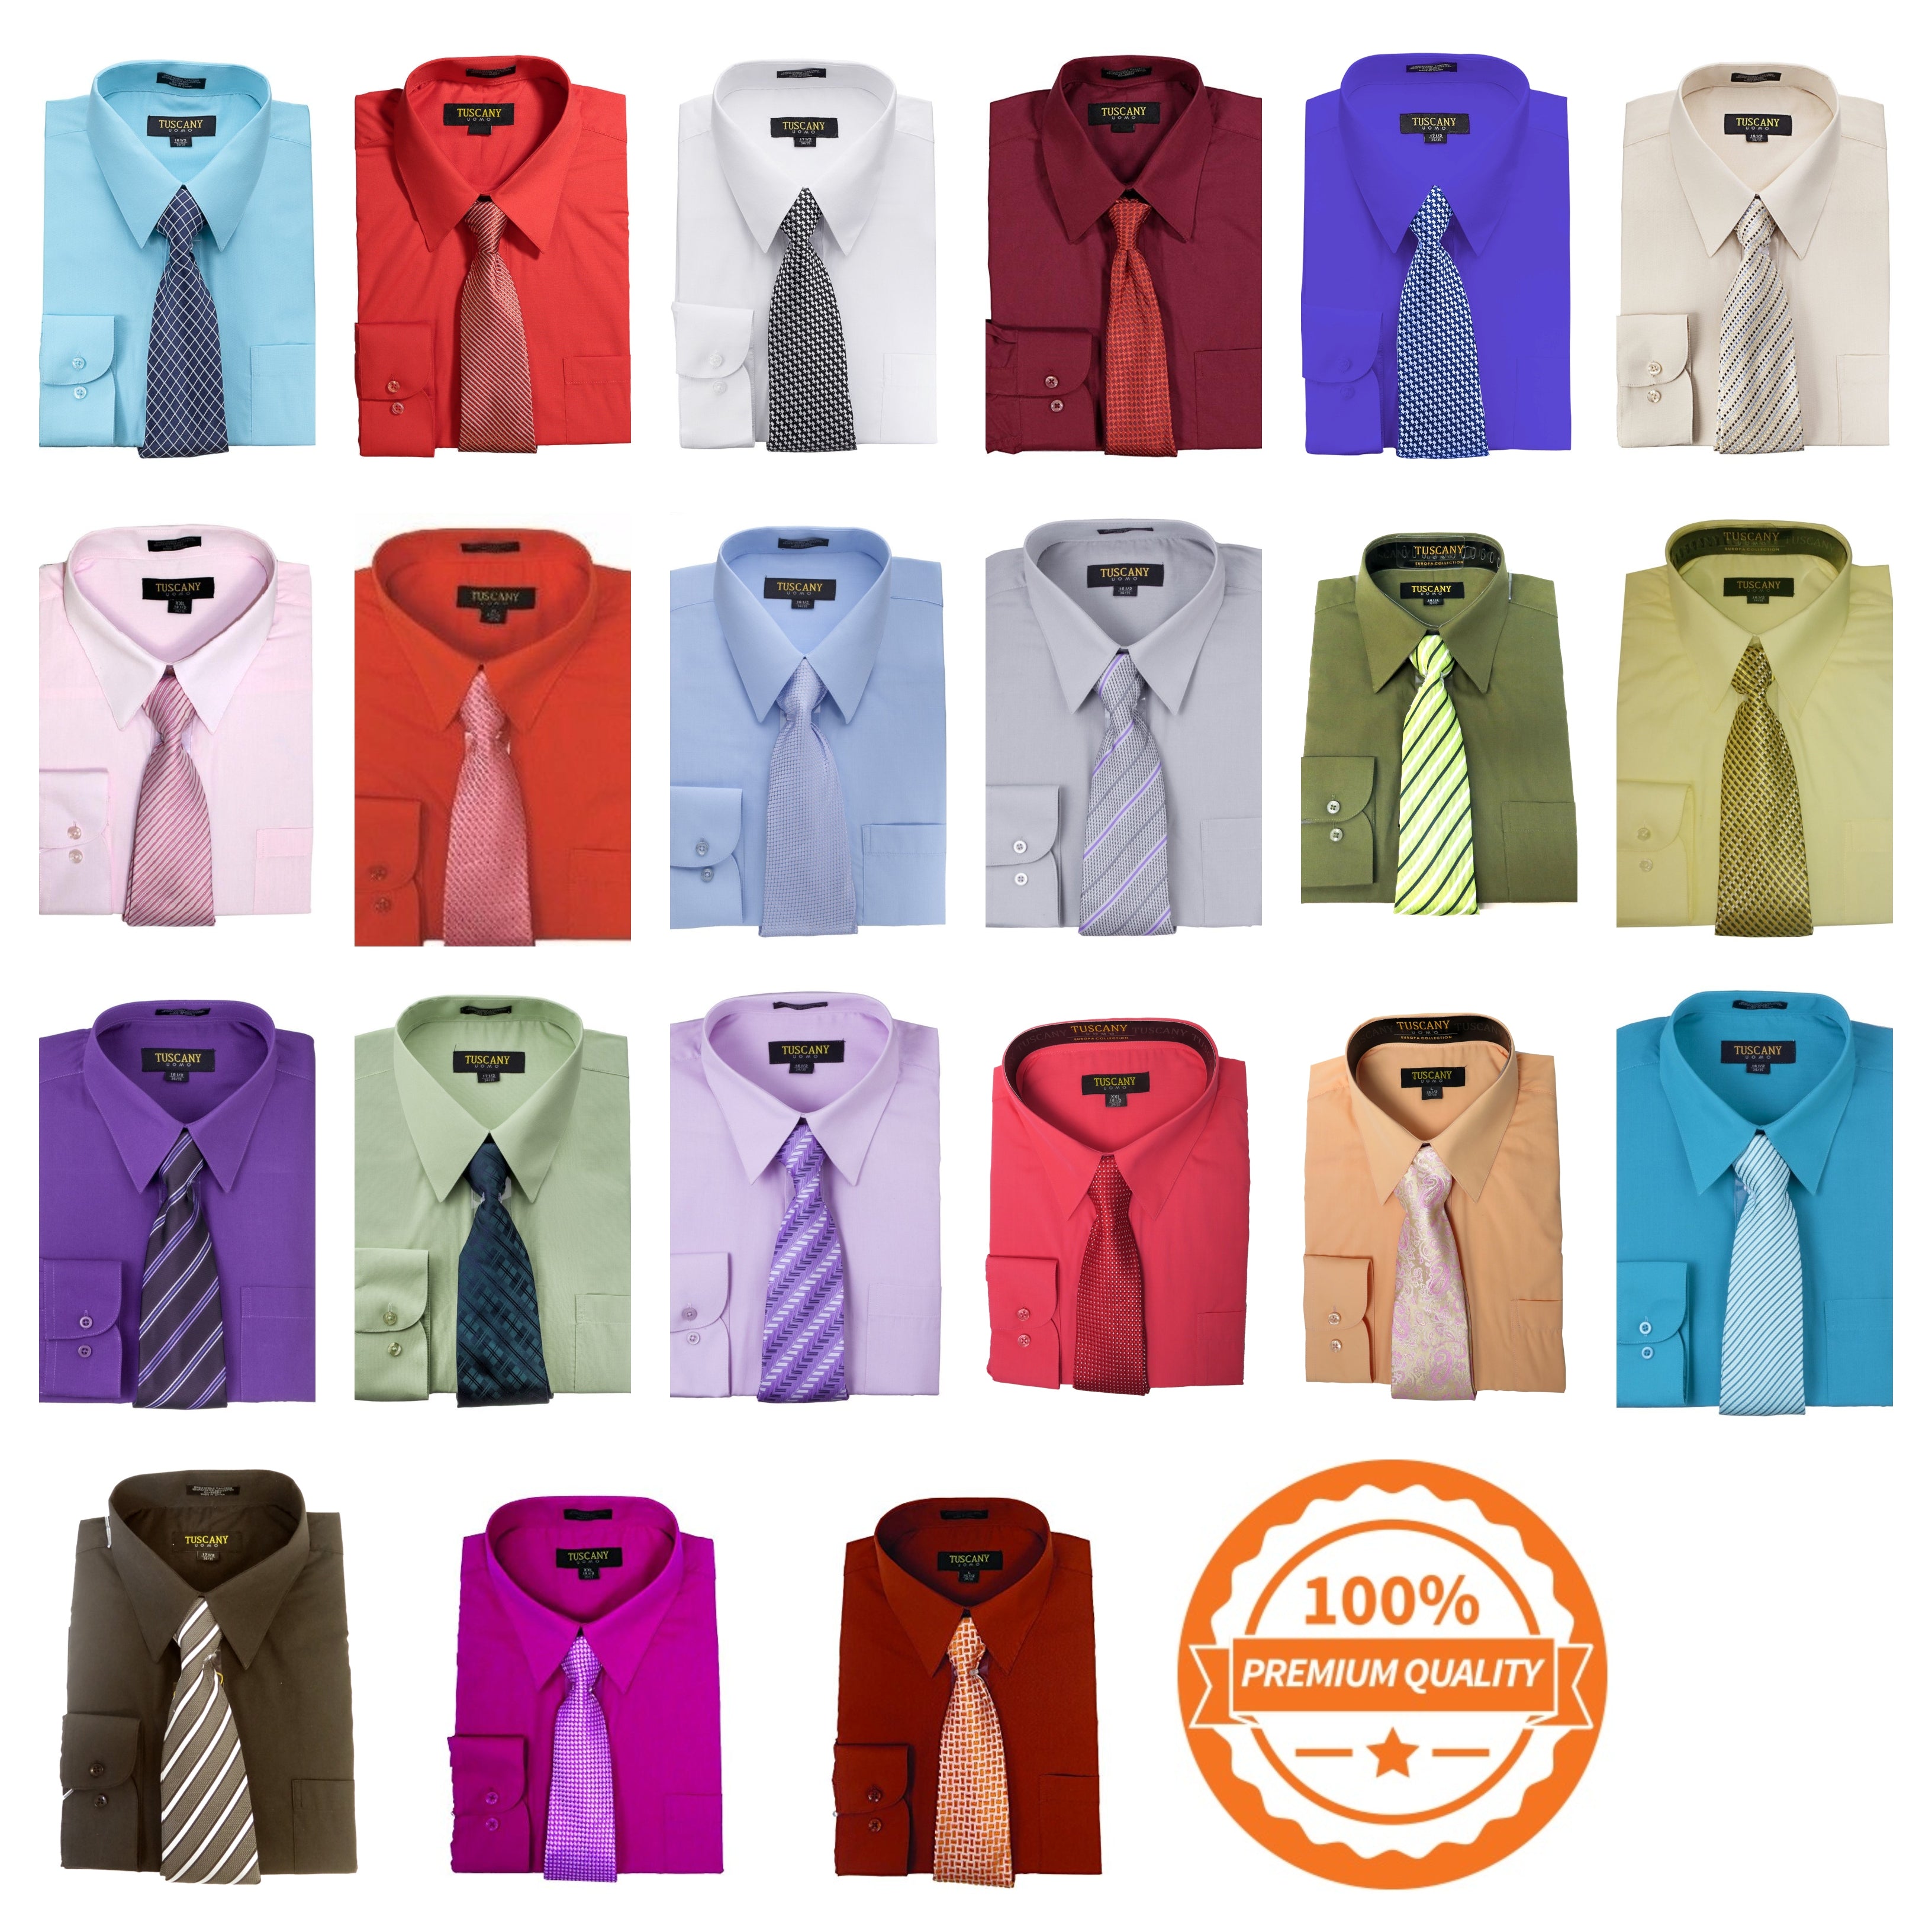 Branded Formal and Casual Shirts for Men atBucheliUSA